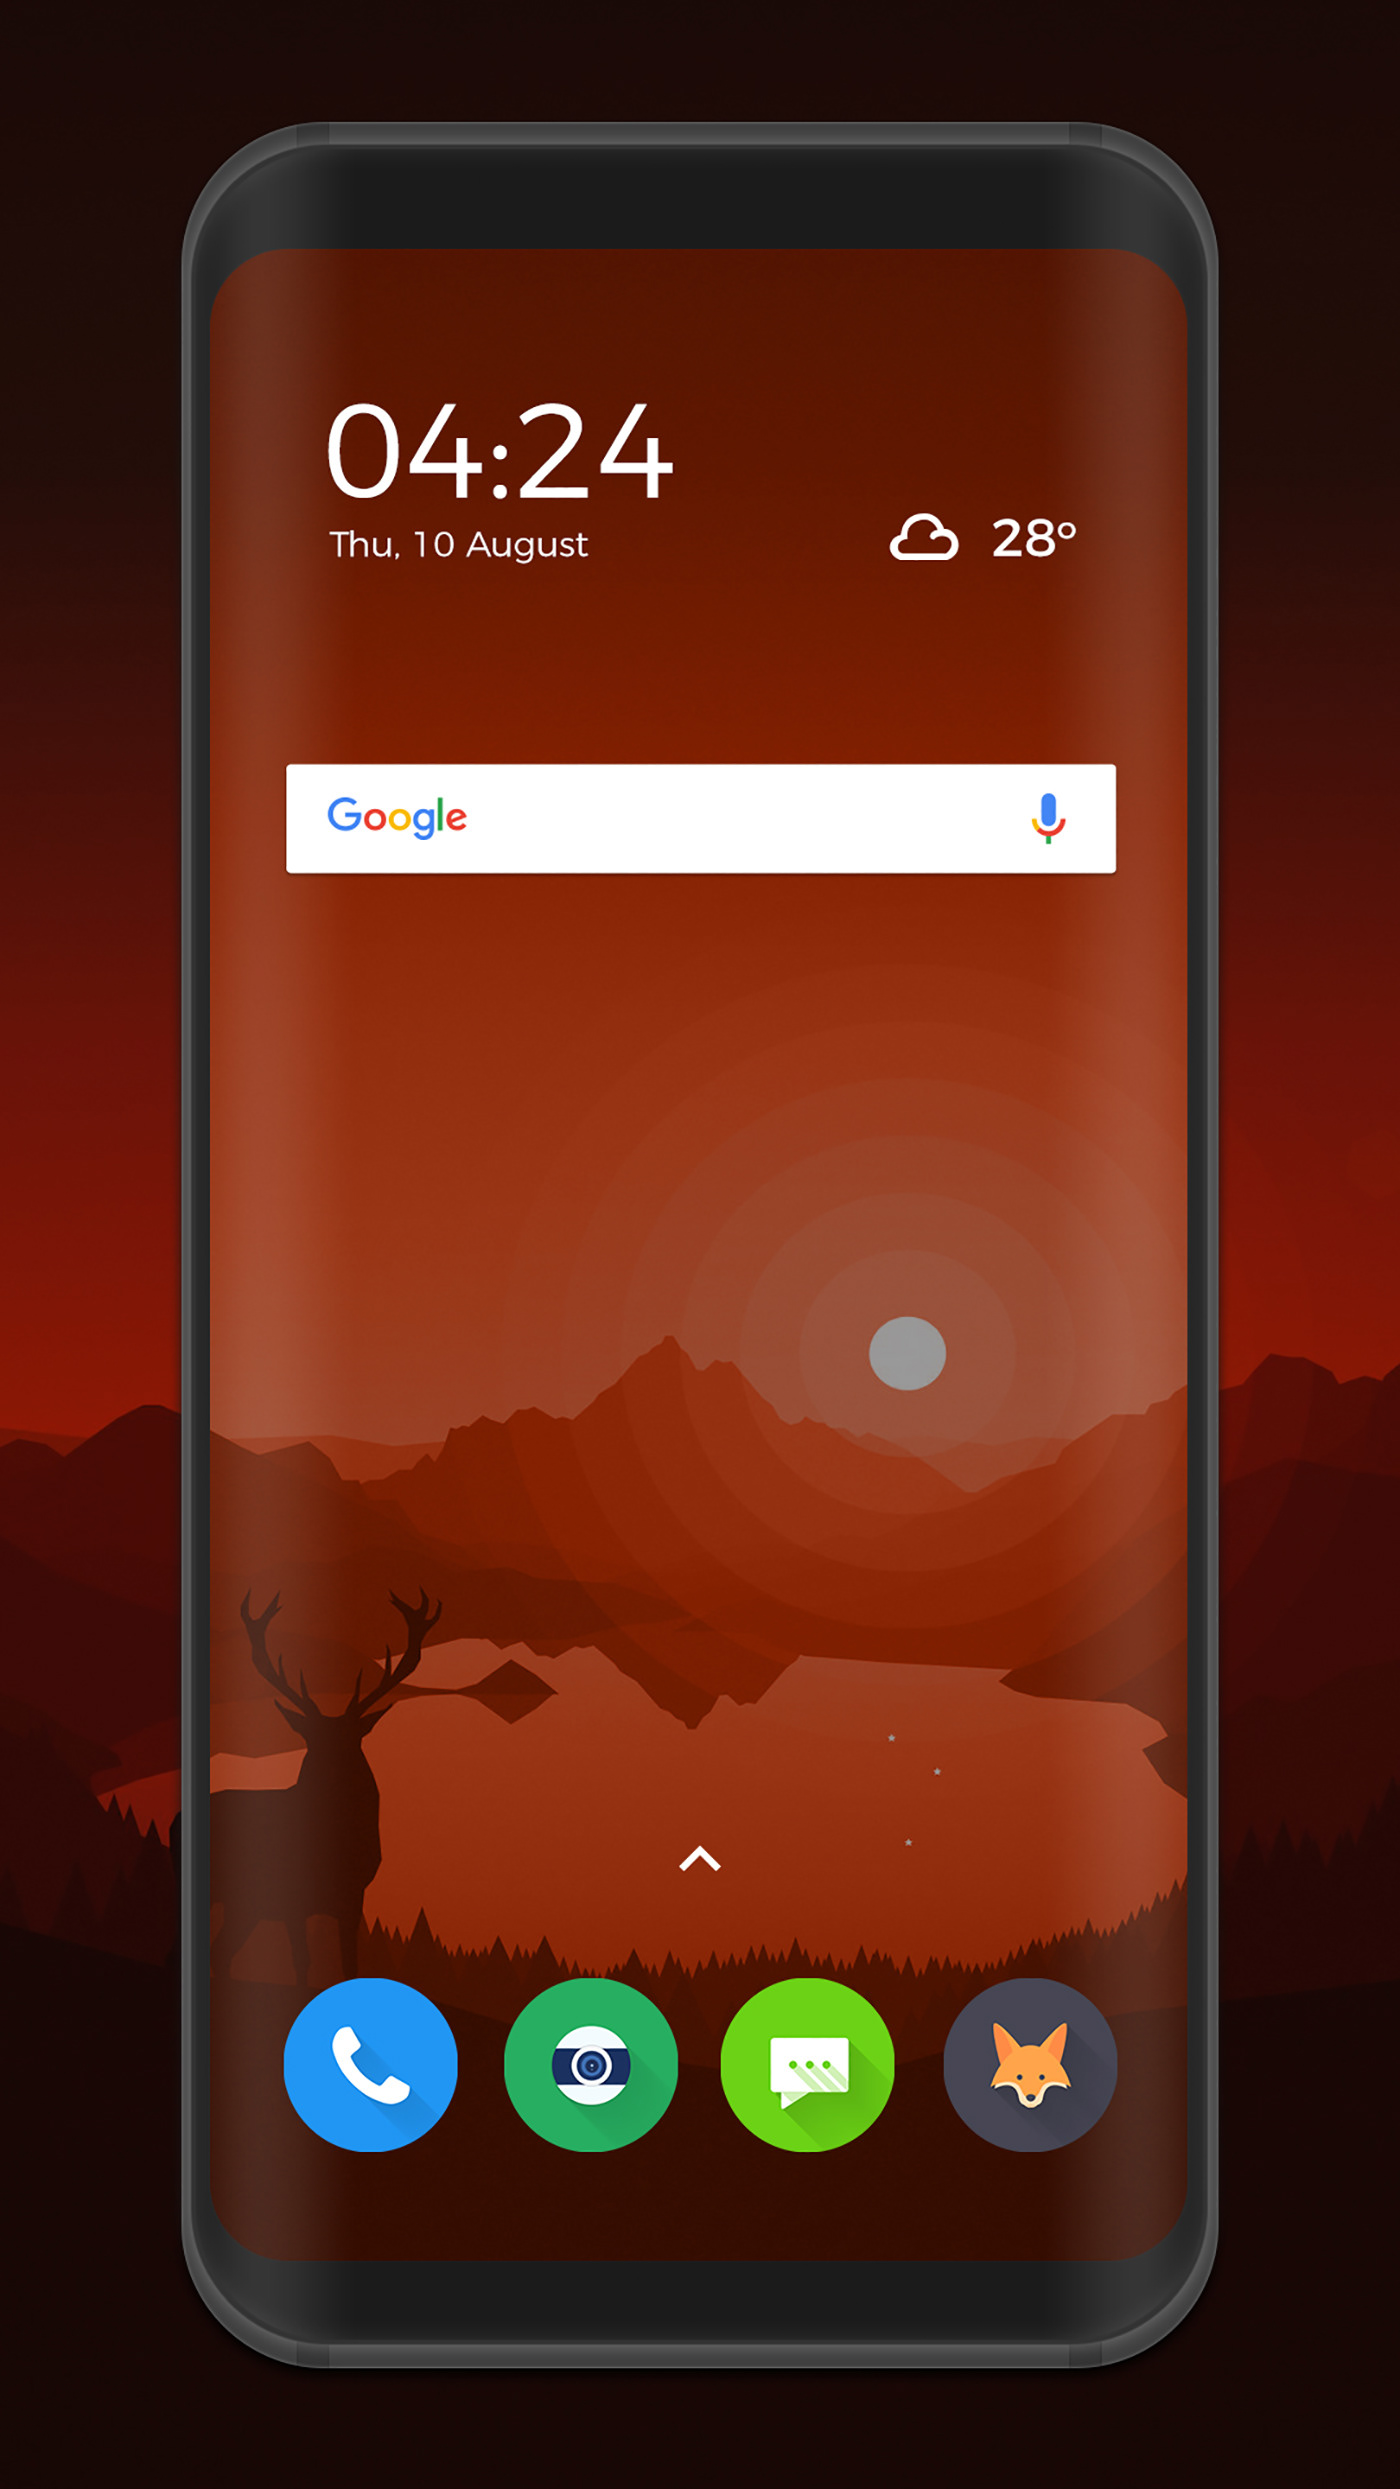 android Theme launcher theme skin icon pack iconpack iconset 3d icons minimal icons flat icons